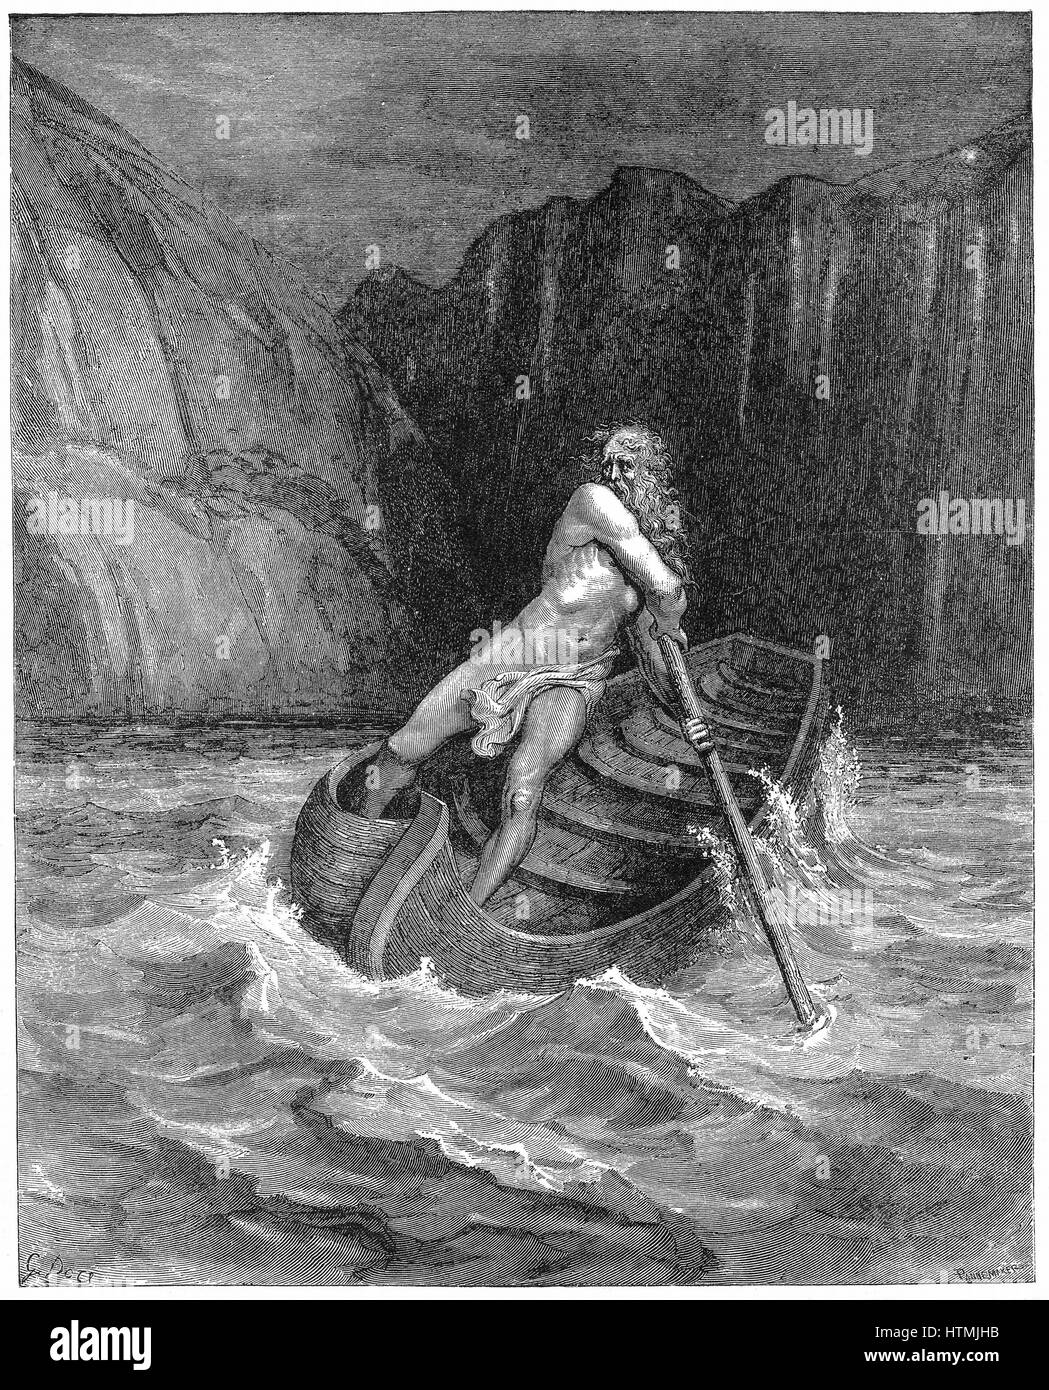 Charon the ferryman rowing to collect Dante and his guide, Virgil, to carry them across the Styx. Illustration by Gustave Dore for Dante 'Inferno', Canto III. Wood engraving 1861 Stock Photo